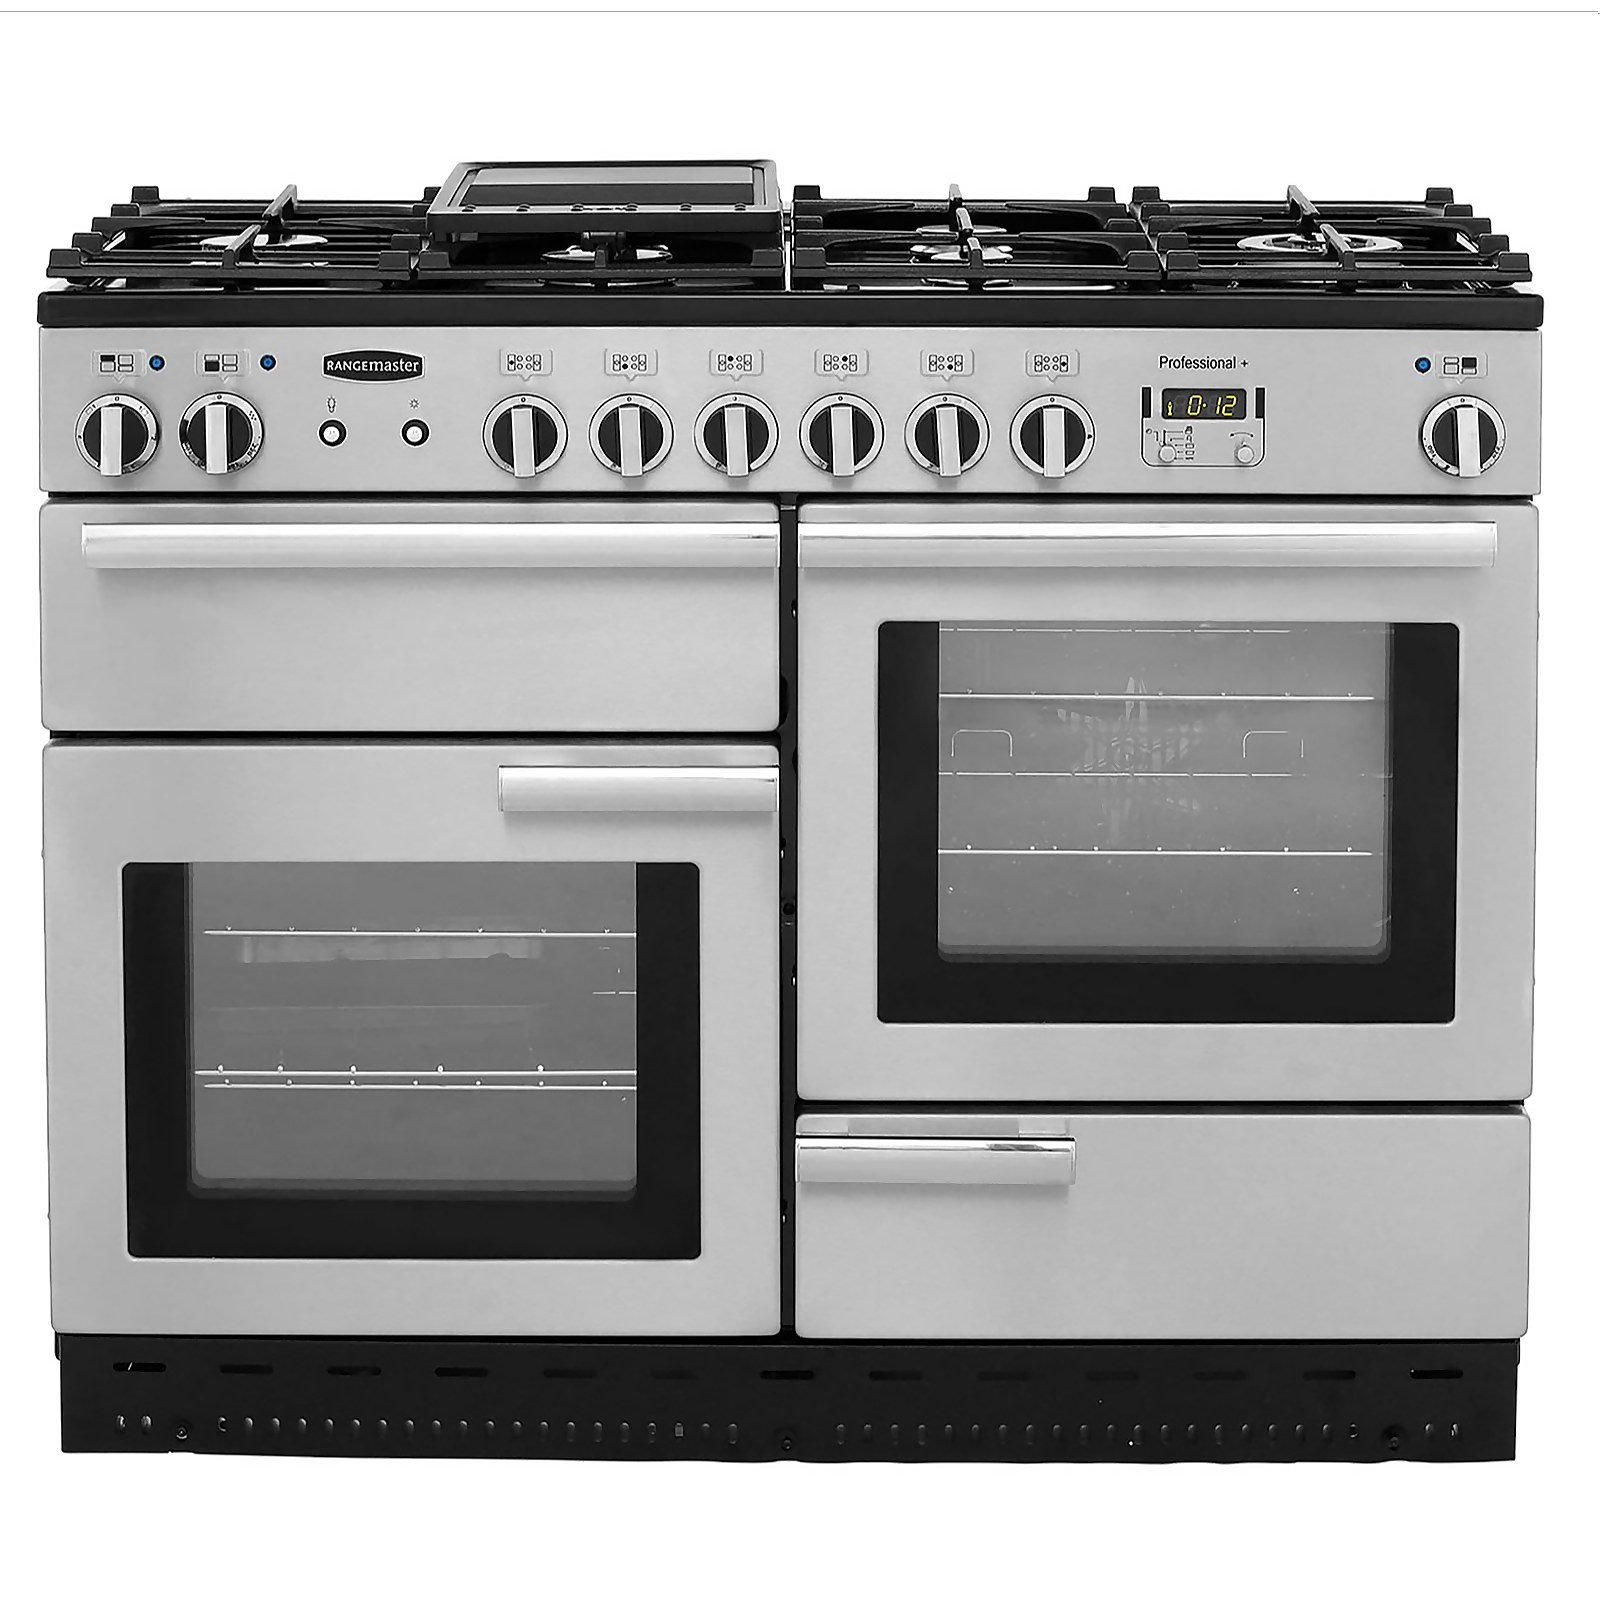 Rangemaster Professional Plus PROP110DFFSS/C 110cm Dual Fuel Range Cooker - Stainless Steel - A/A Rated